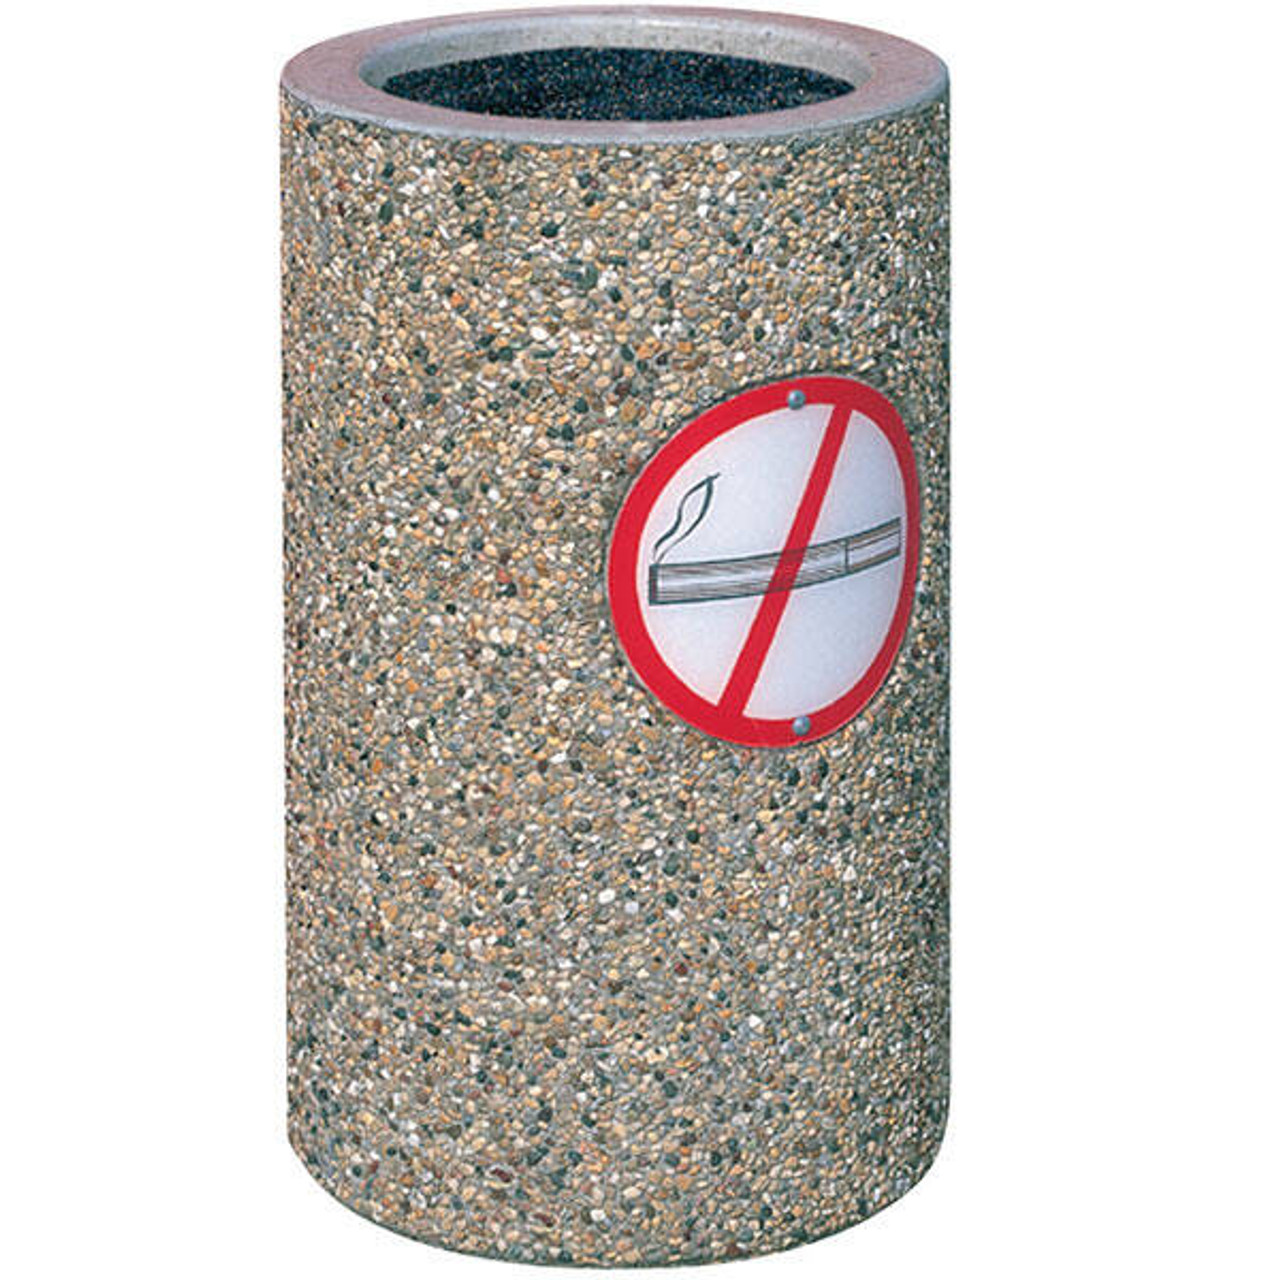 Concrete Ash Urn Outdoor Ashtray TF2005 with No Smoking Logo Exposed Aggregate